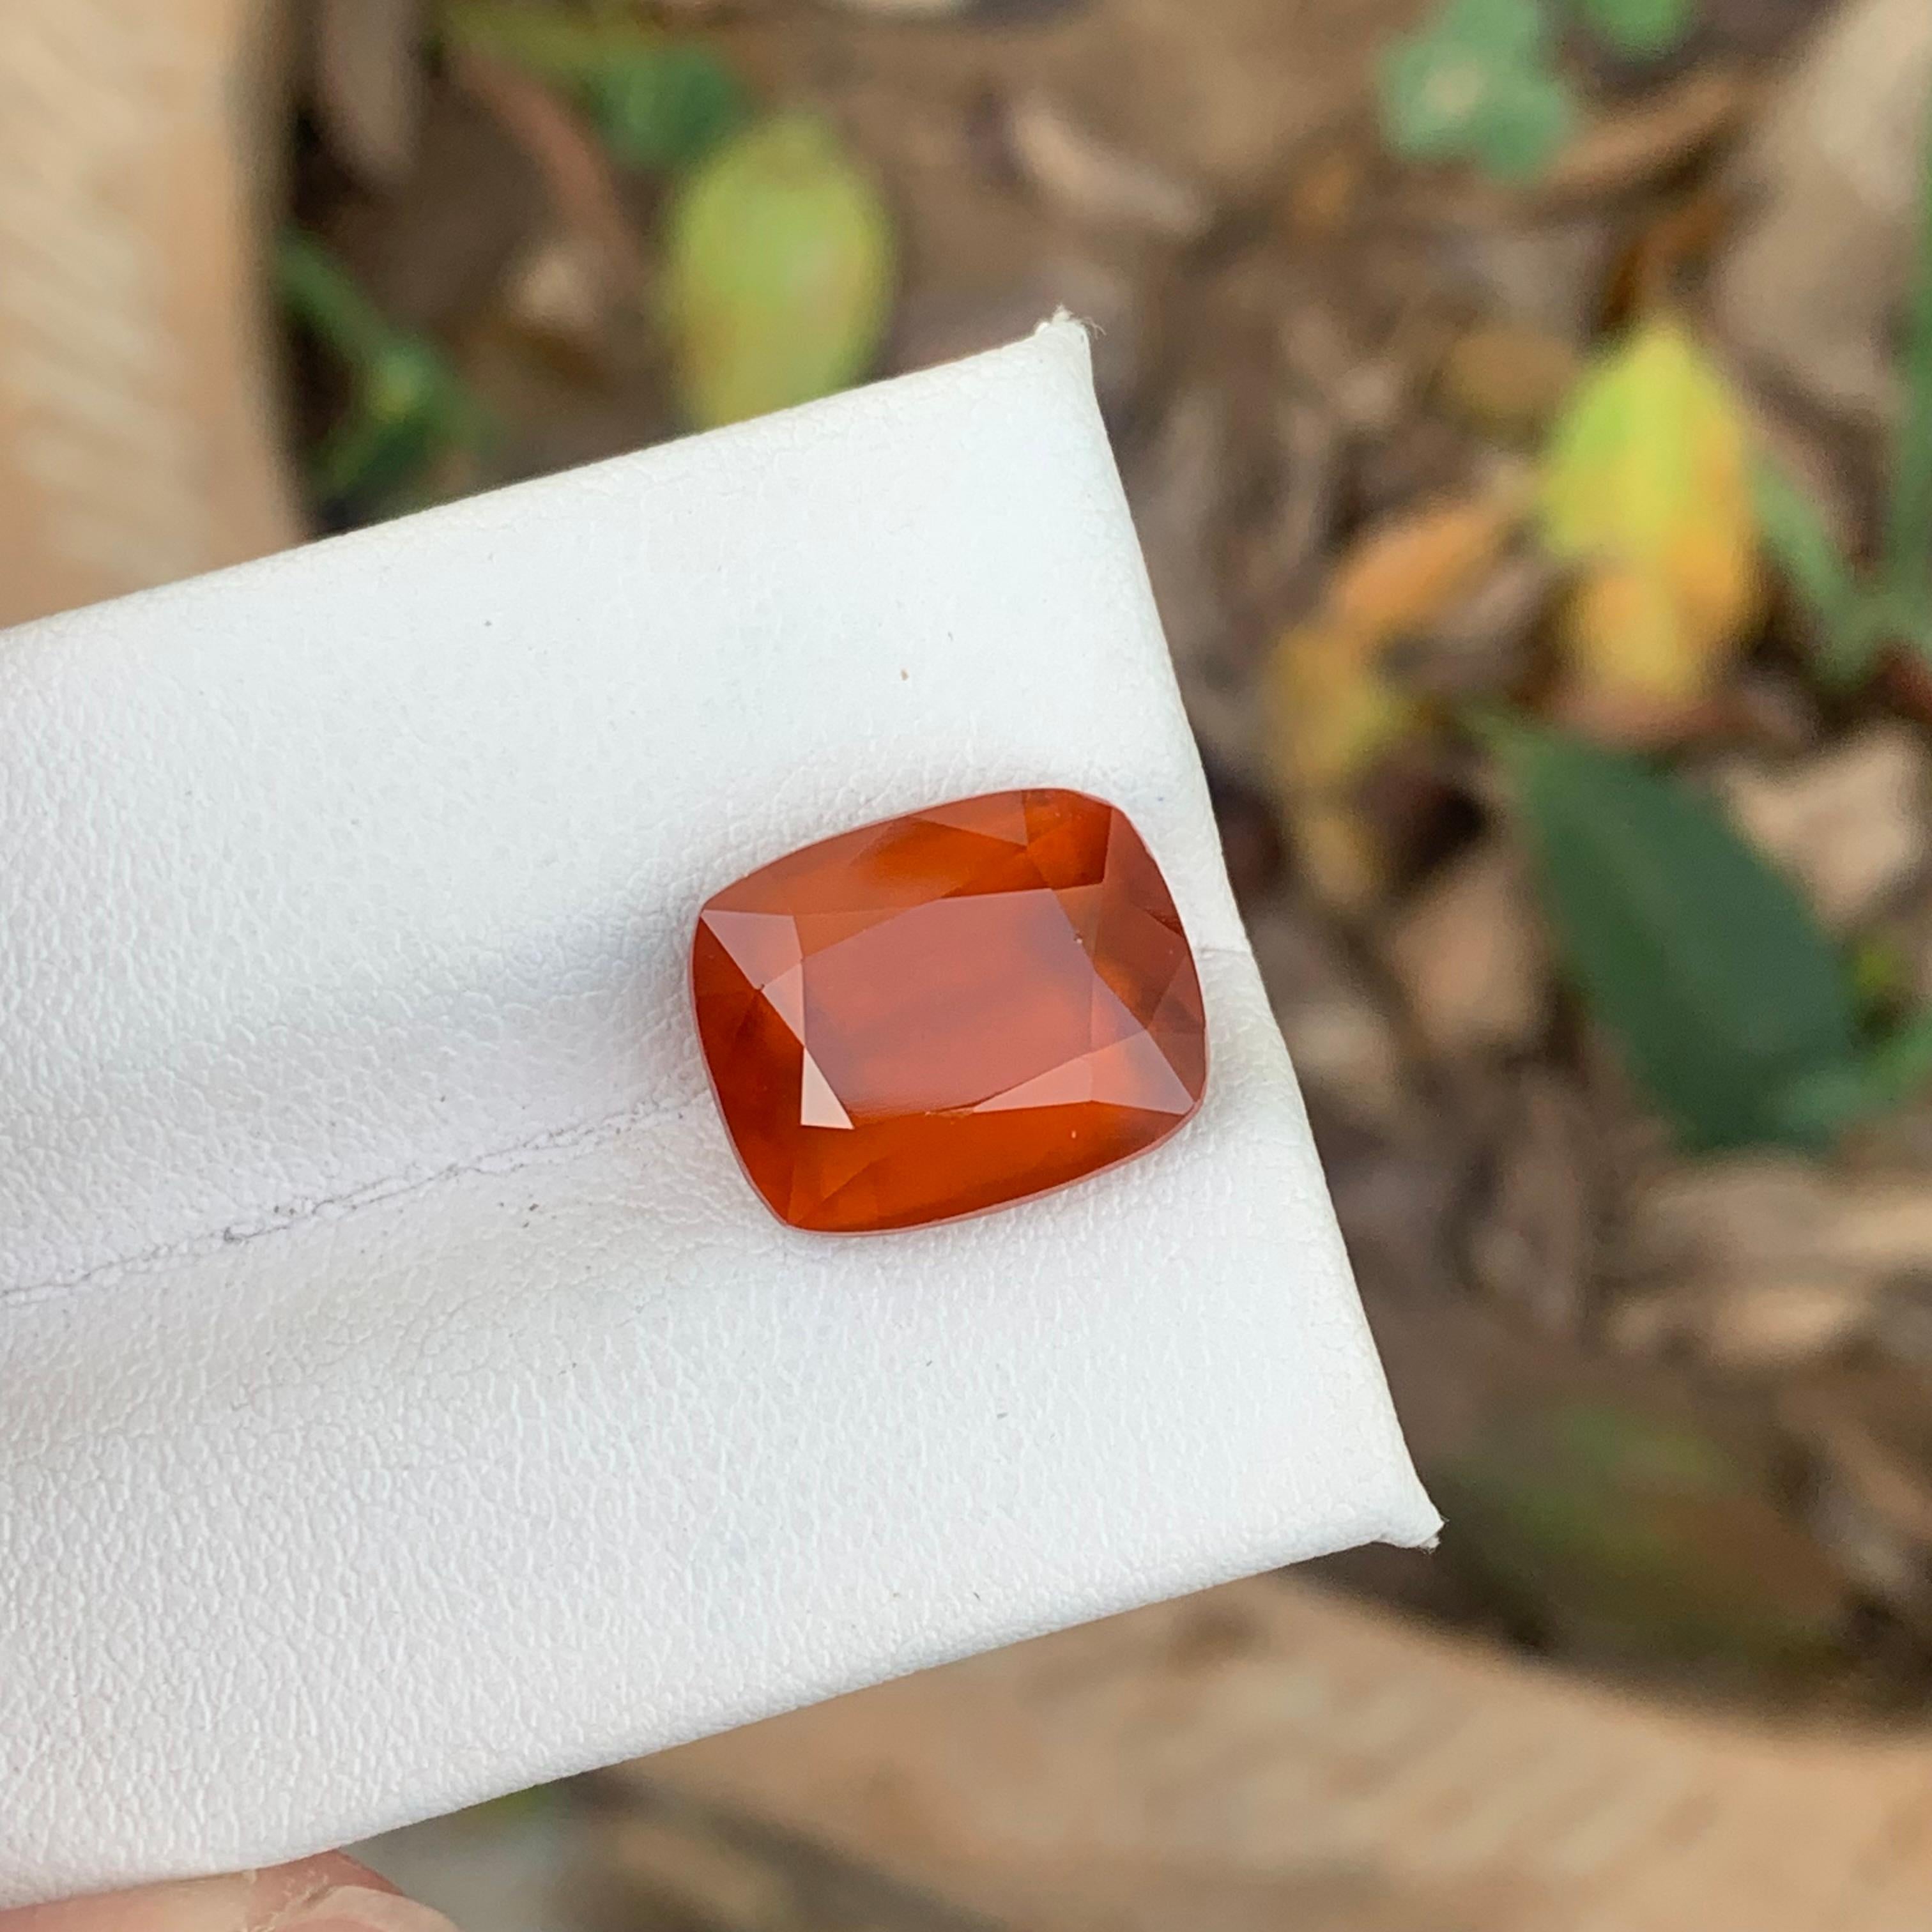 Gemstone Type : Hessonite Garnet
Weight : 9.65 Carats
Dimensions : 13.3x10.9x7.4 Mm
Origin : Africa
Clarity : Smoky 
Shape: Long Cushion
Color: Fanta Orange
Certificate: On Demand
Birthstone: January Month
According to Vedic astrologists, wearing a